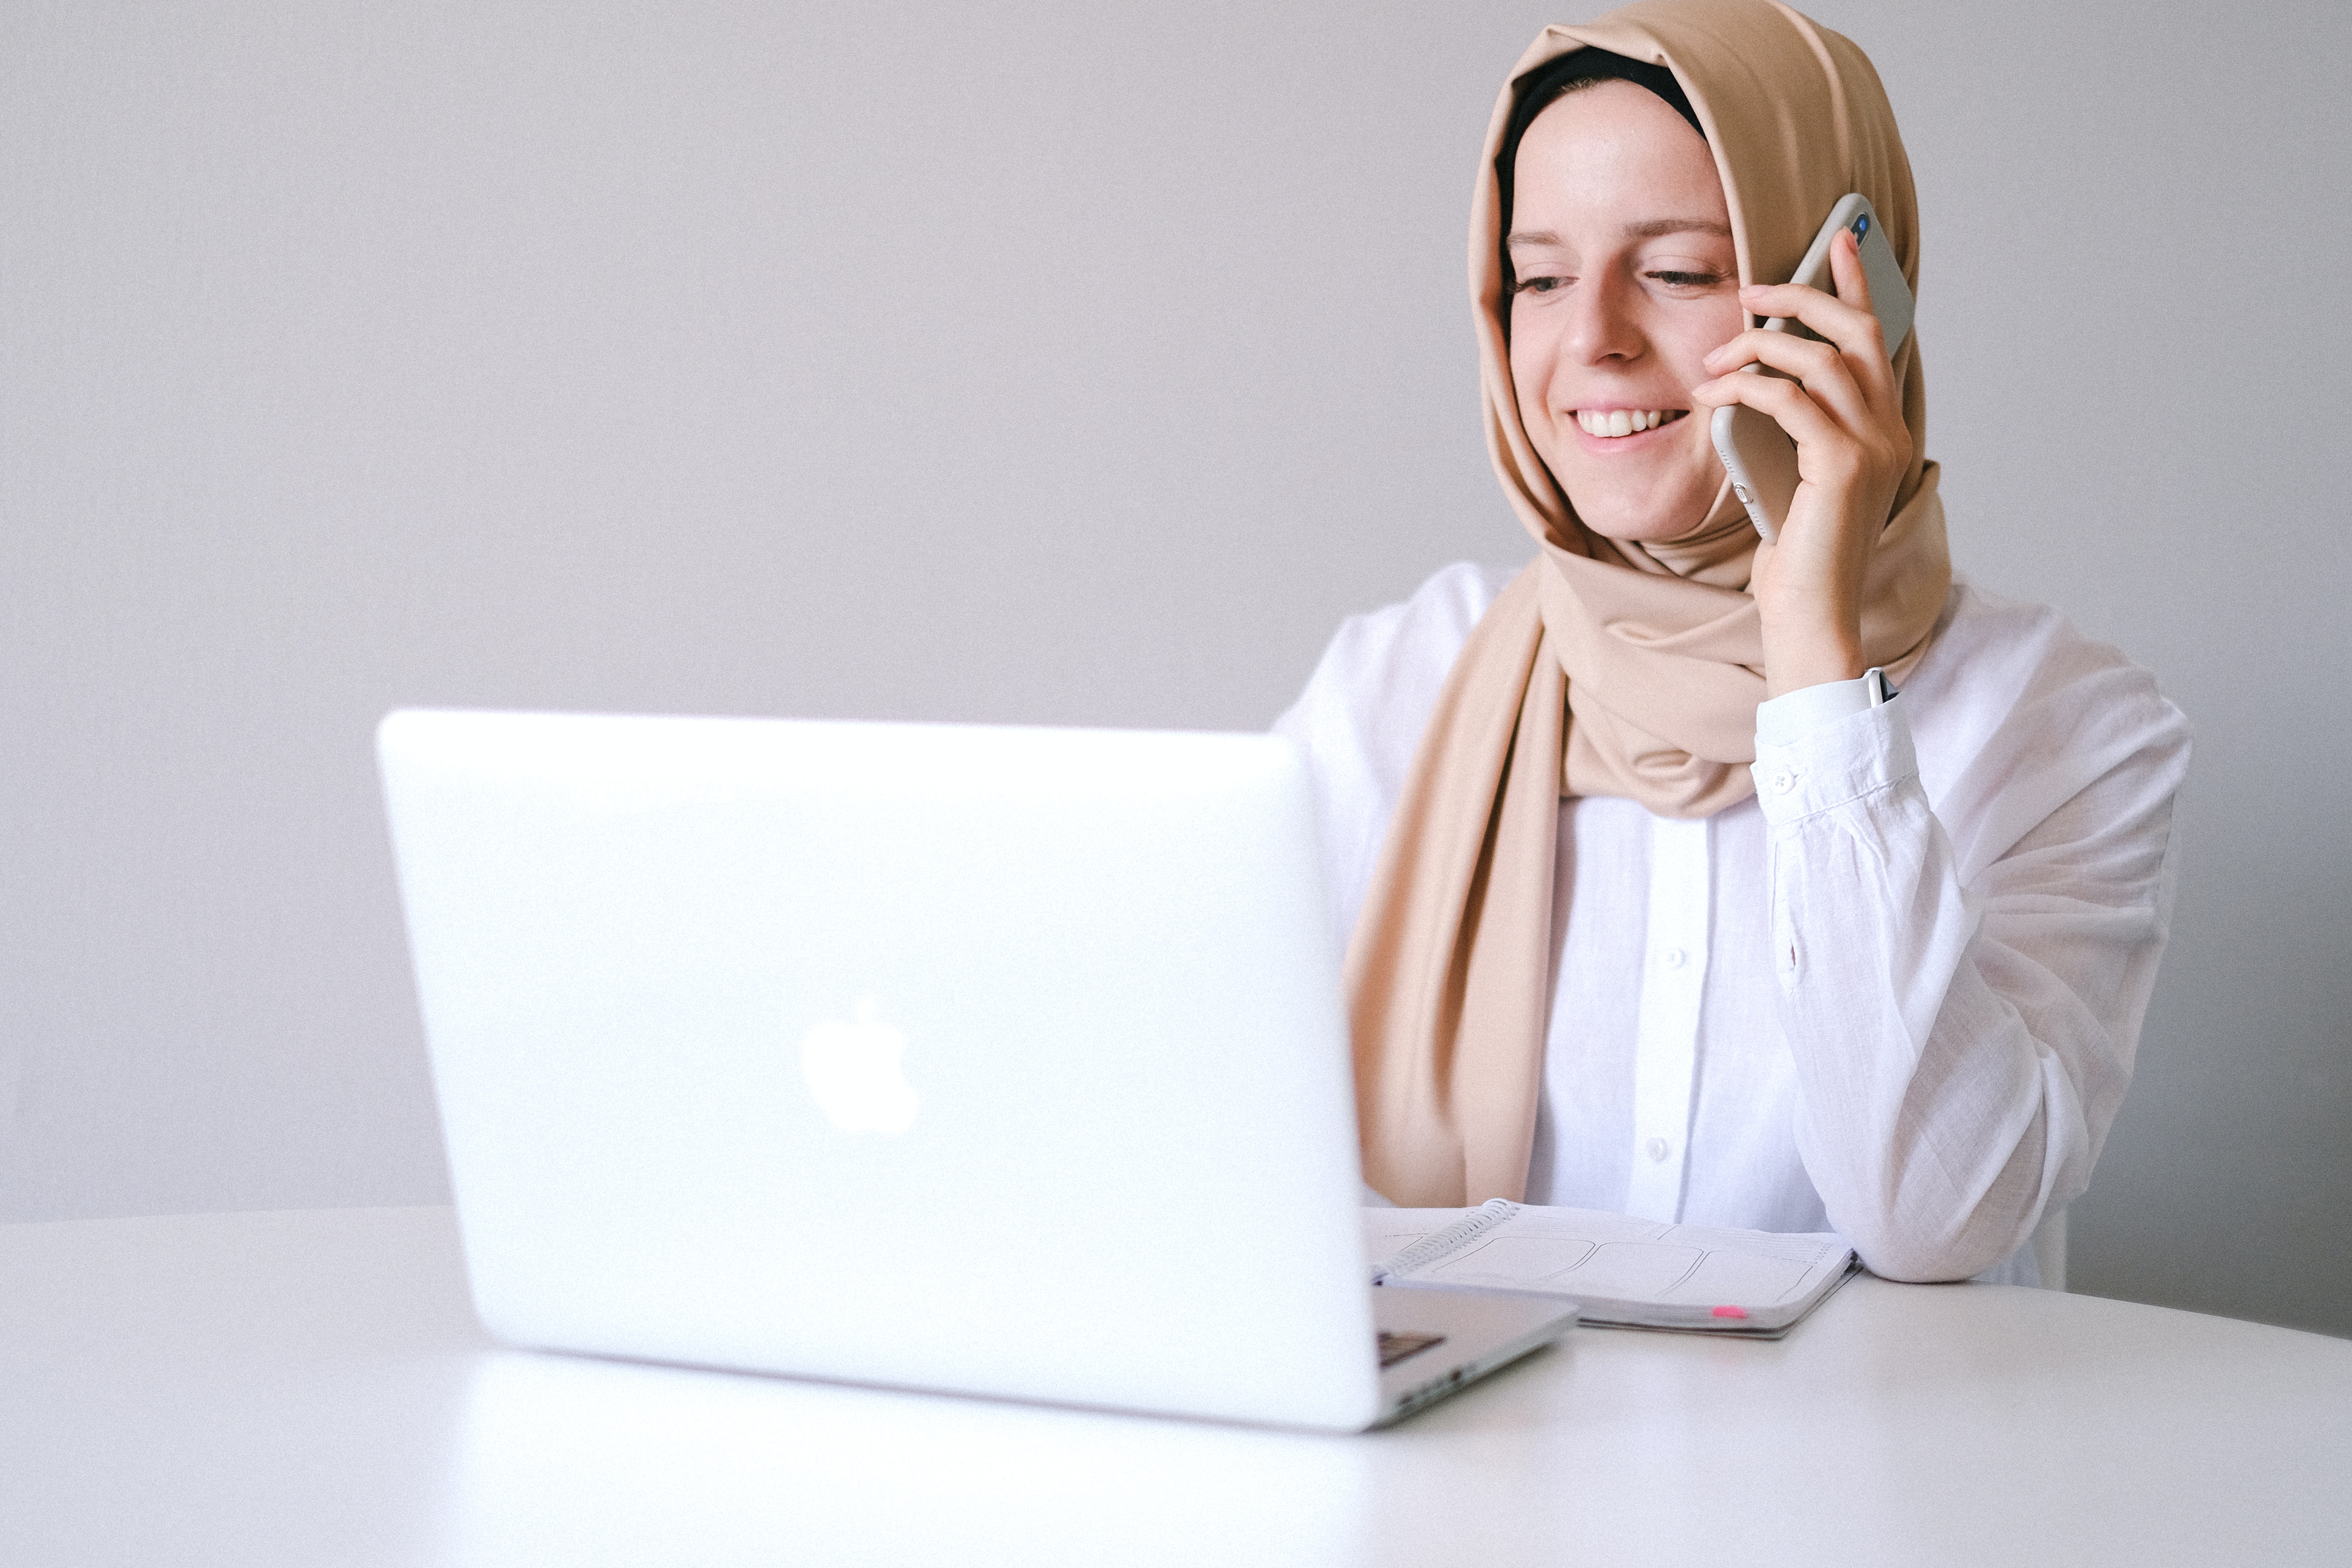 A woman sitting in front of her computer and talking on her mobile phone. She is wearing a white button up shirt and a tan headscarf.